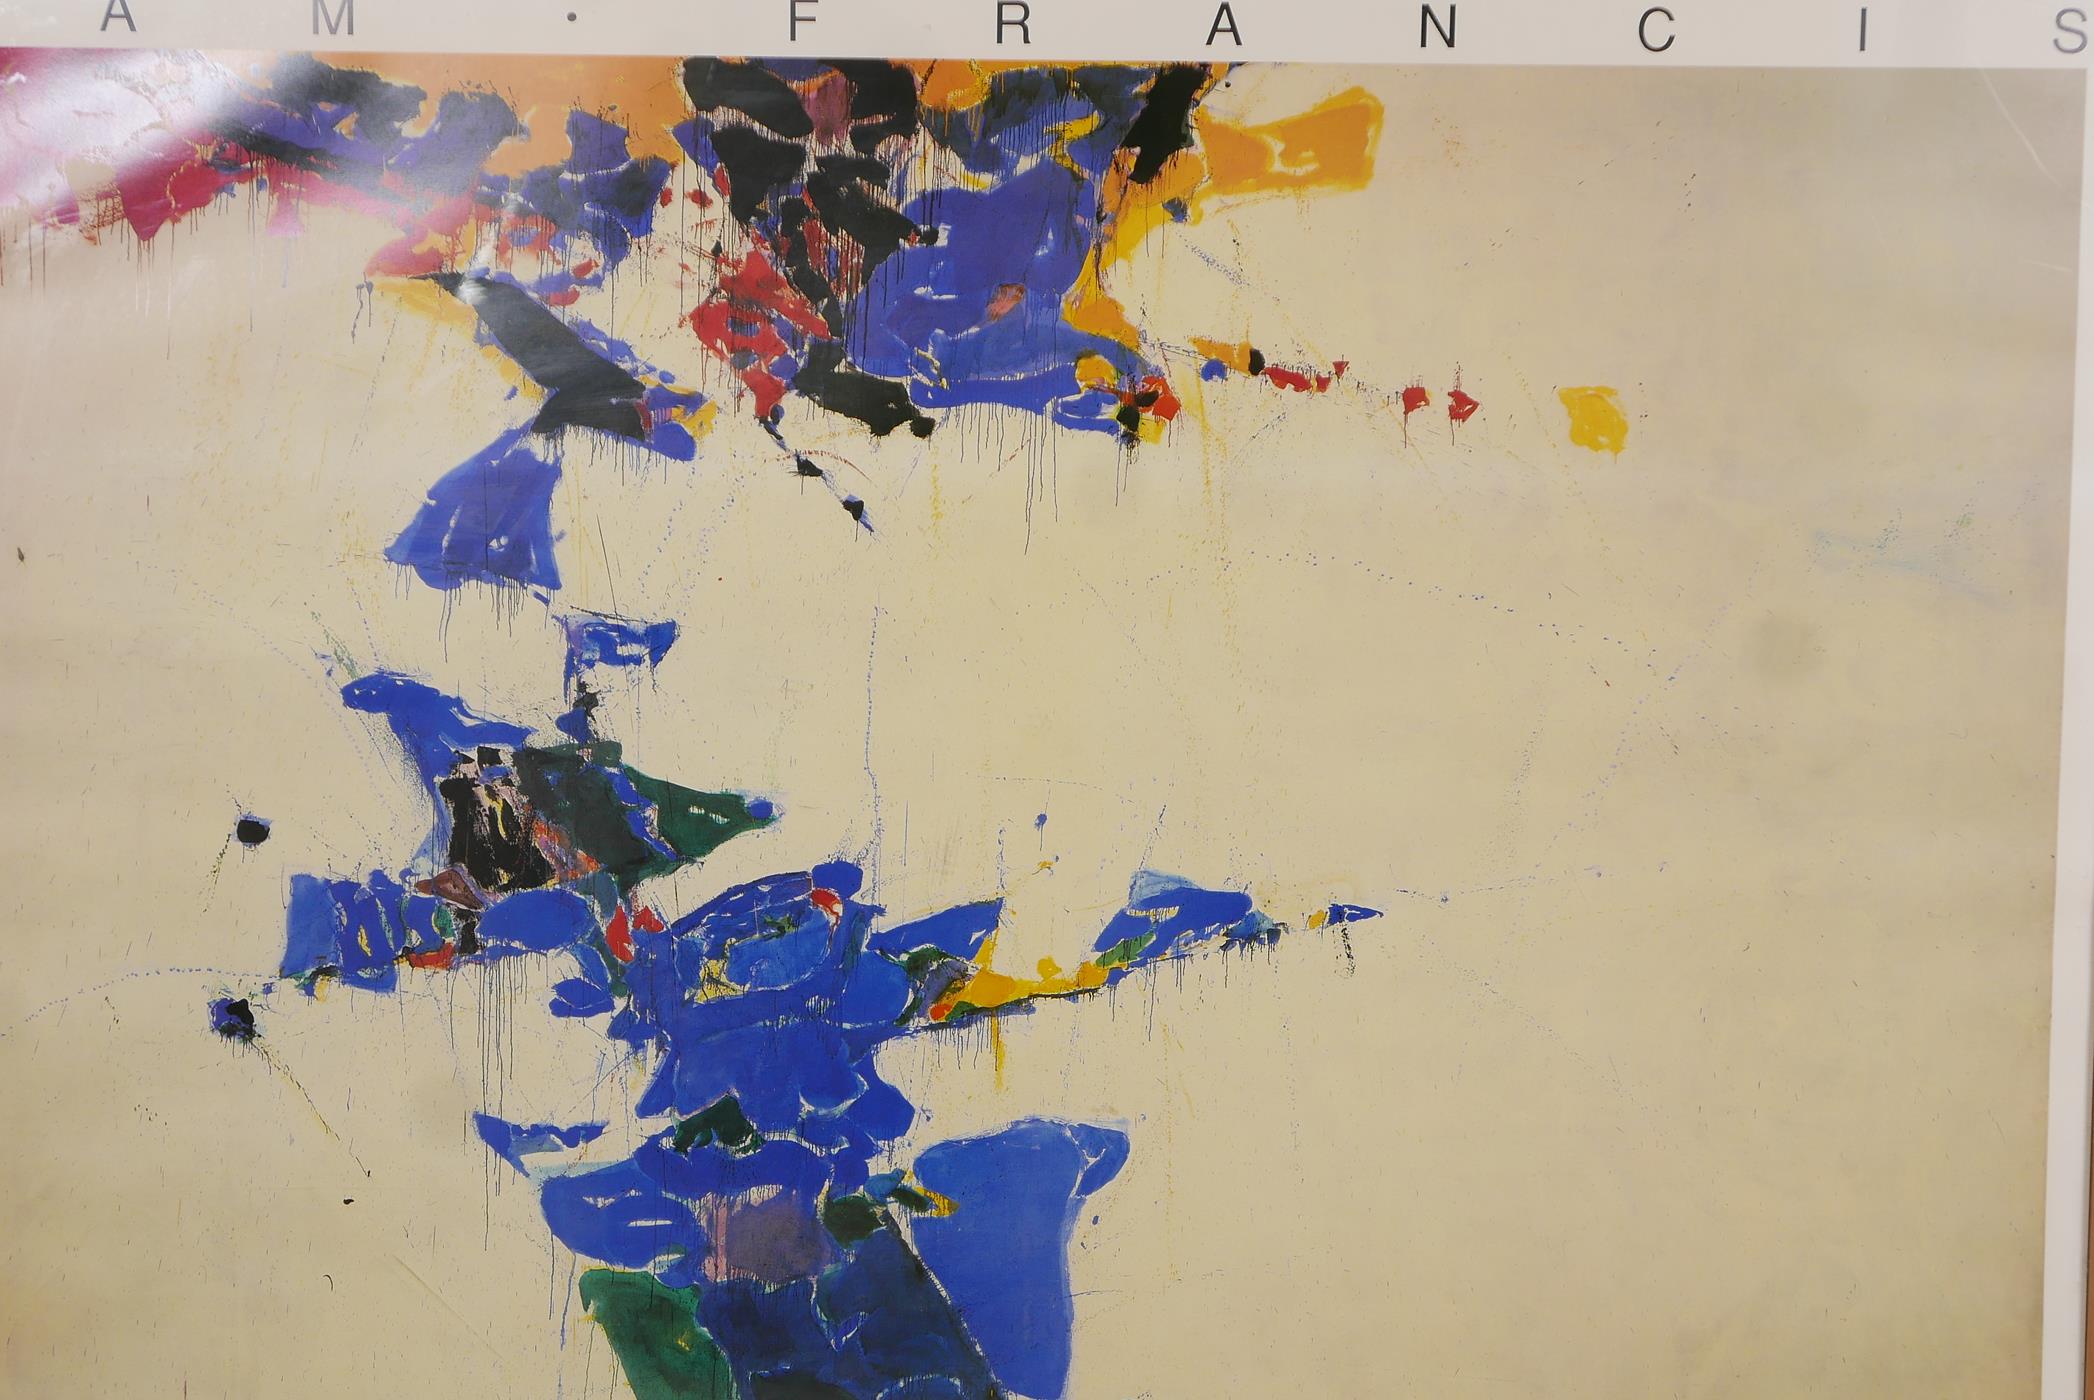 Sam Francis, exhibition poster, Kunstmuseum Basel, published by Forme, Italy 1989, 57" x 41"